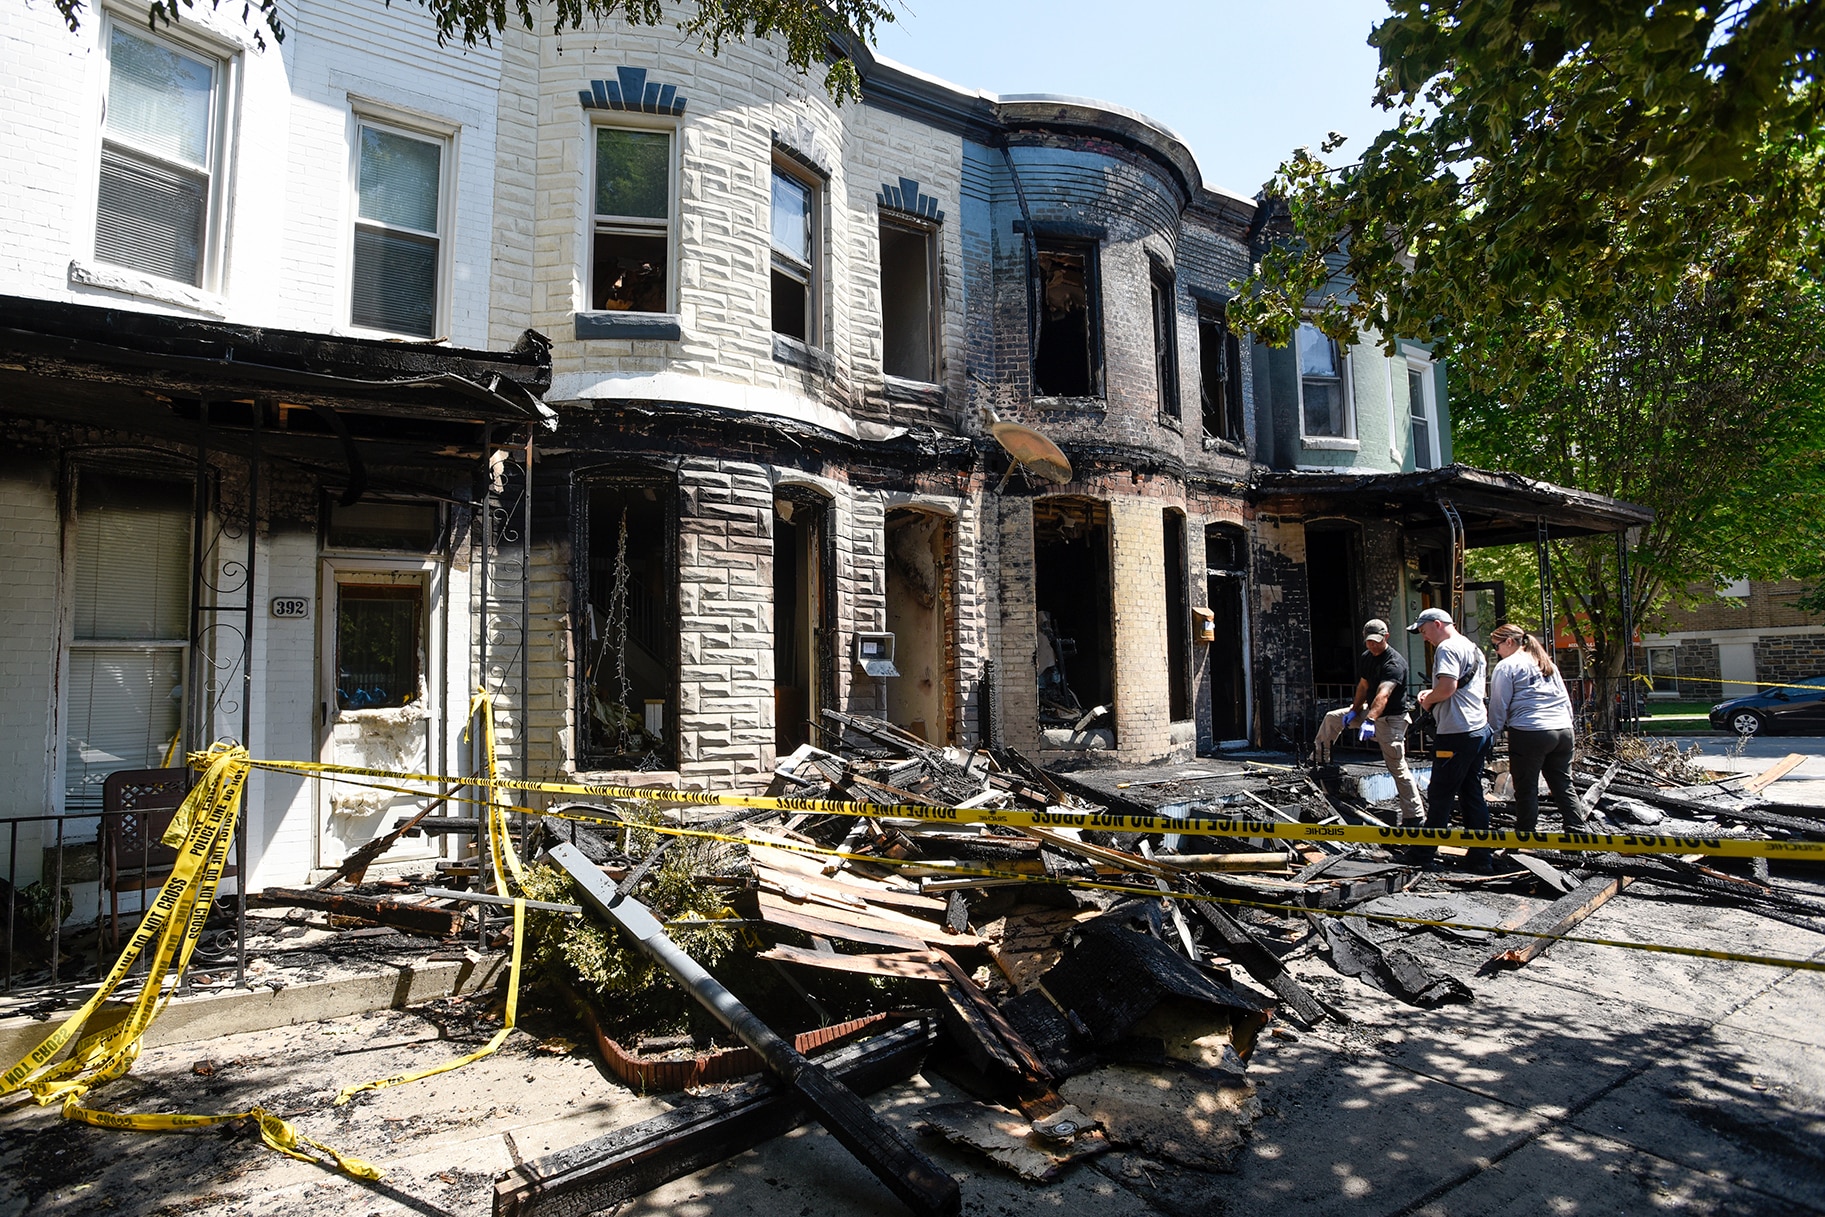 Fire investigators work at the scene of a row house fire in Baltimore